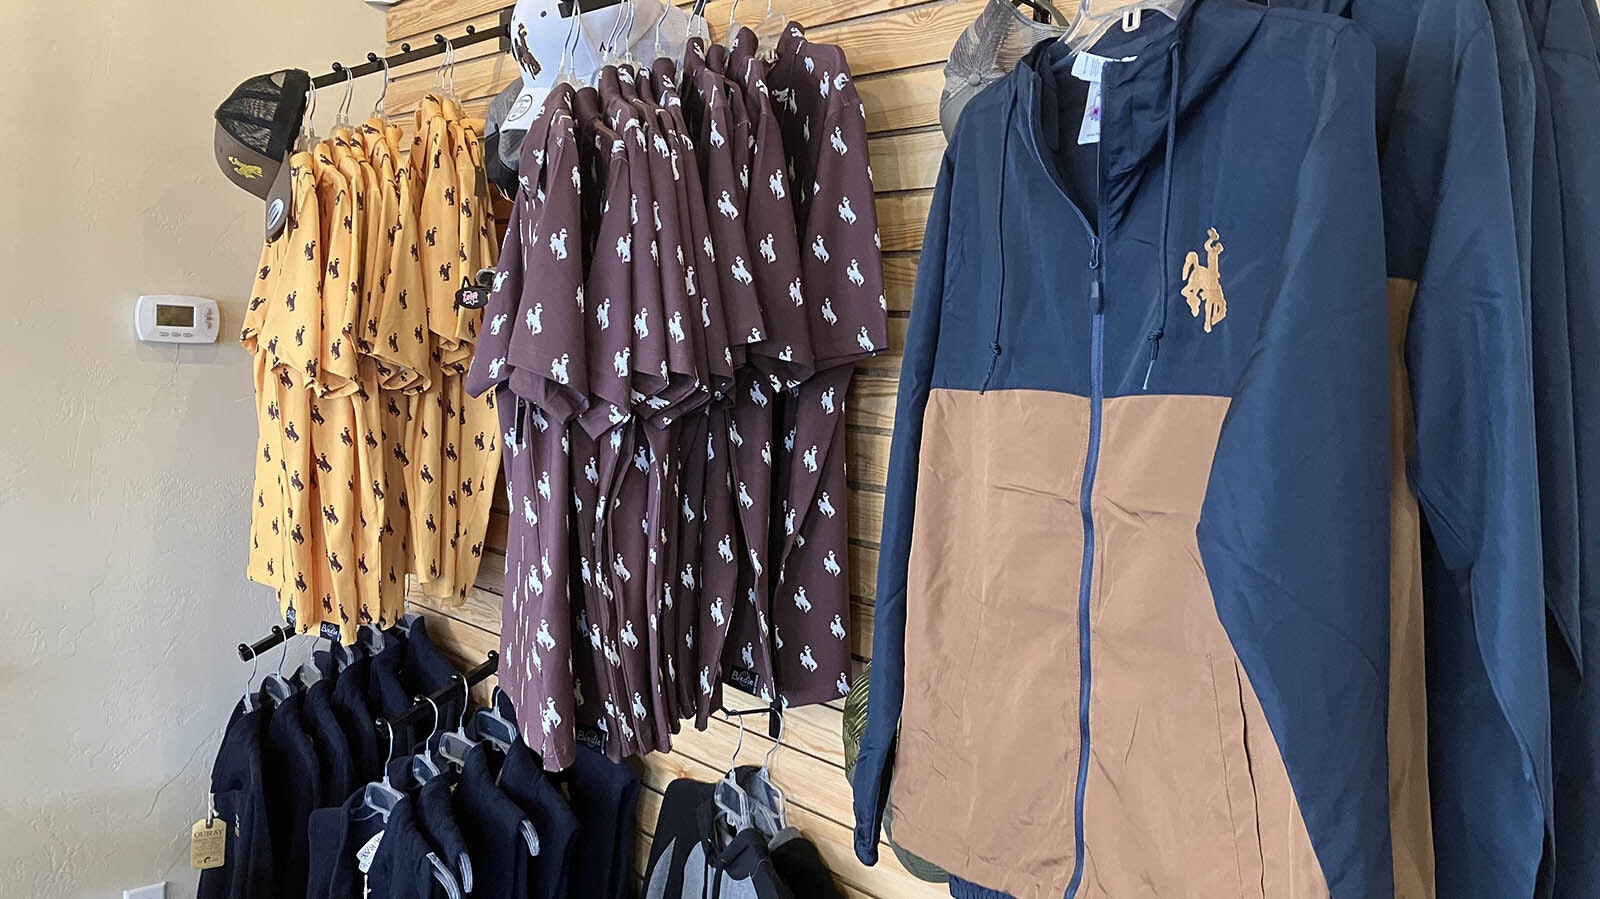 Wyoming clothing is also a part of the deli and owner Toni Dovalina said July and December are her biggest months for that part of her business.